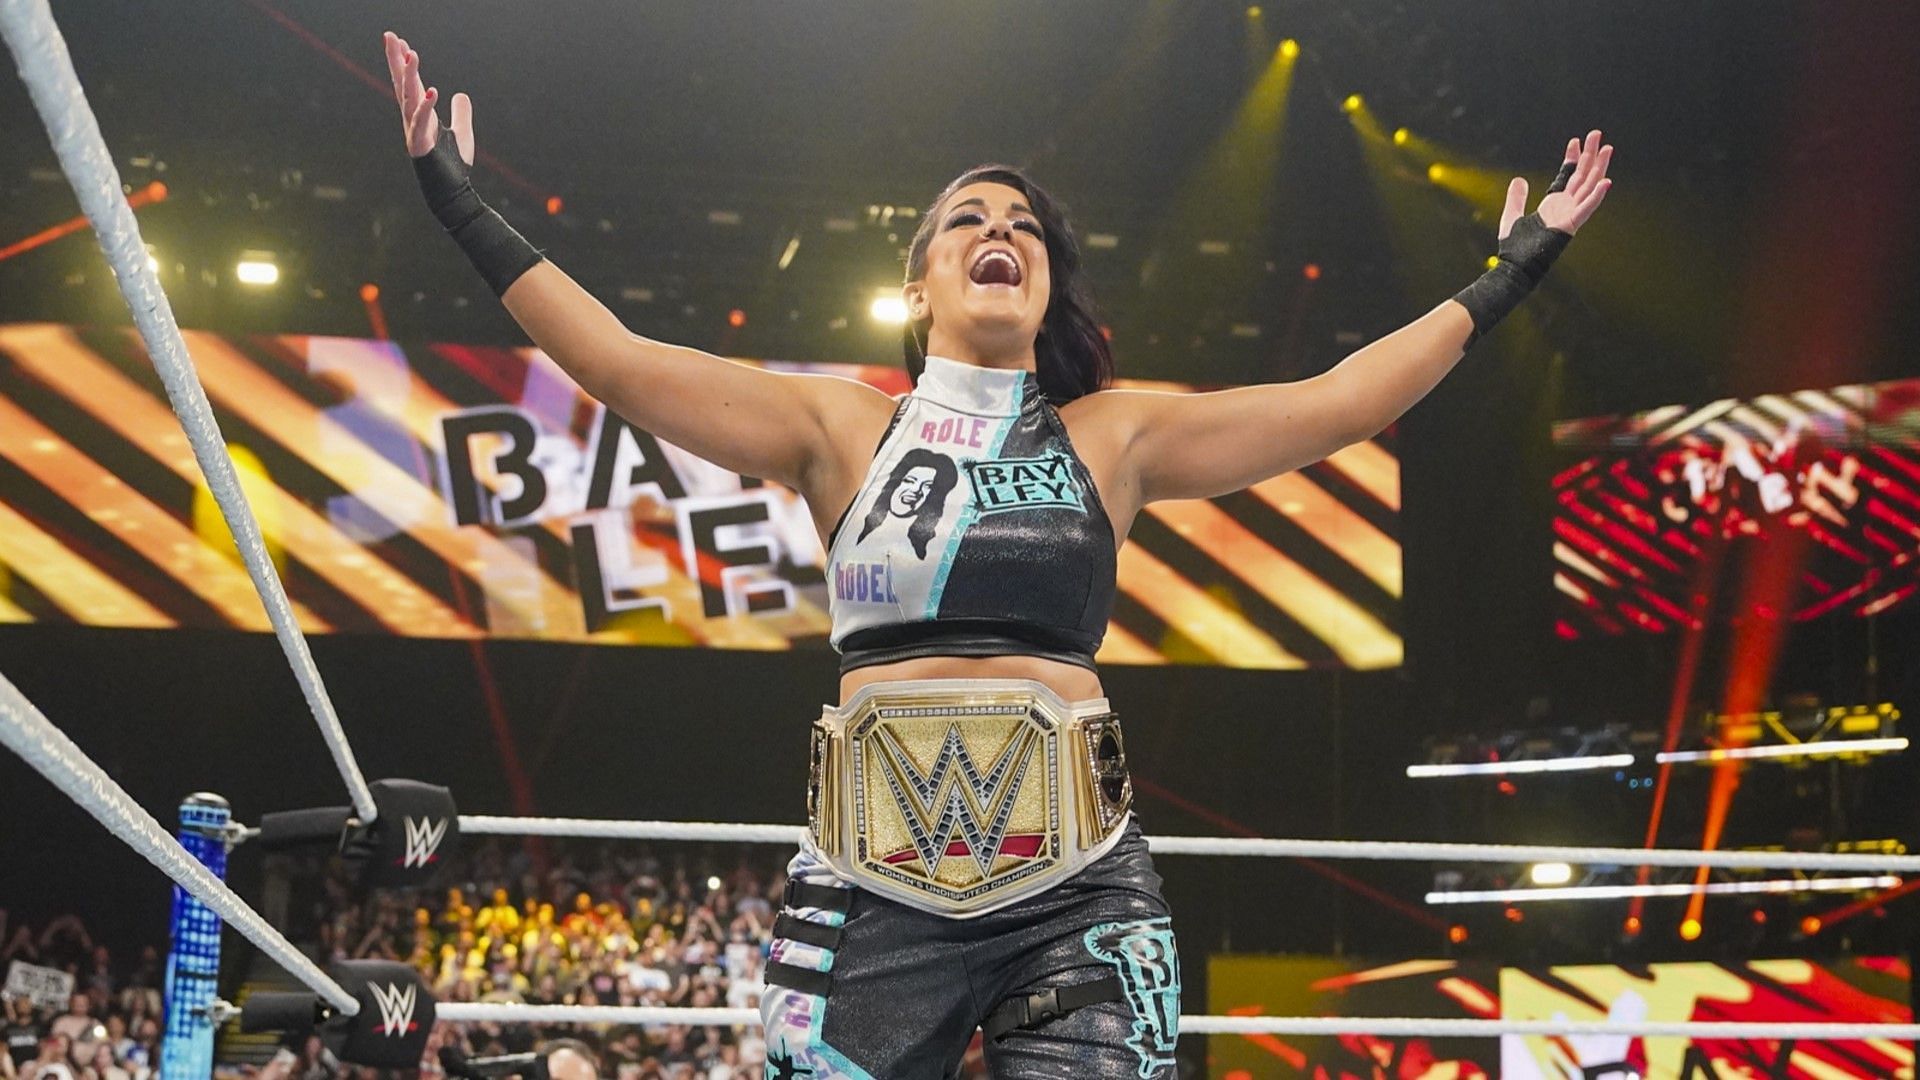 Bayley enters the ring with the WWE Women